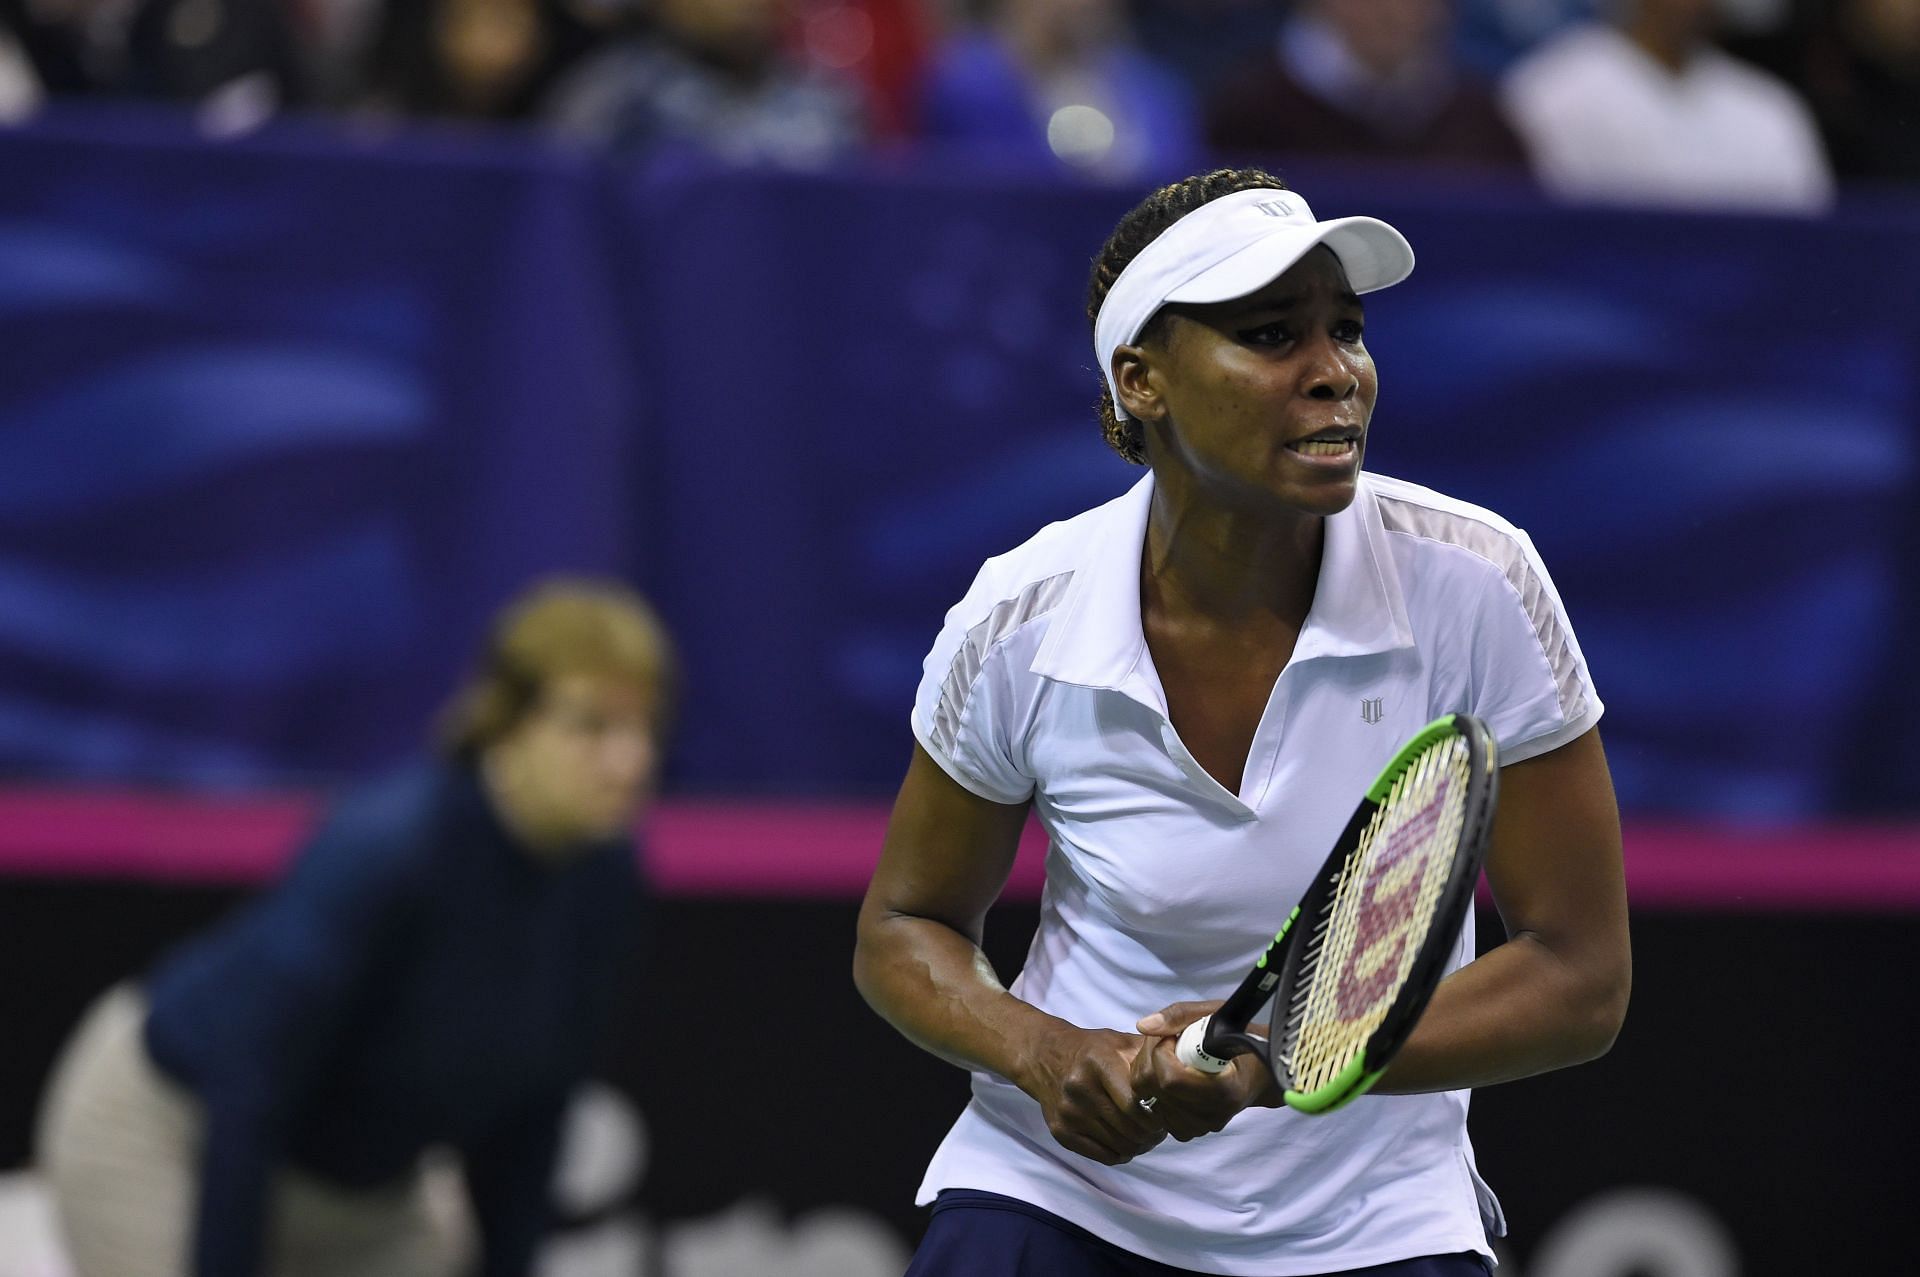 Venus Williams representing the United States at the 2018 Fed Cup